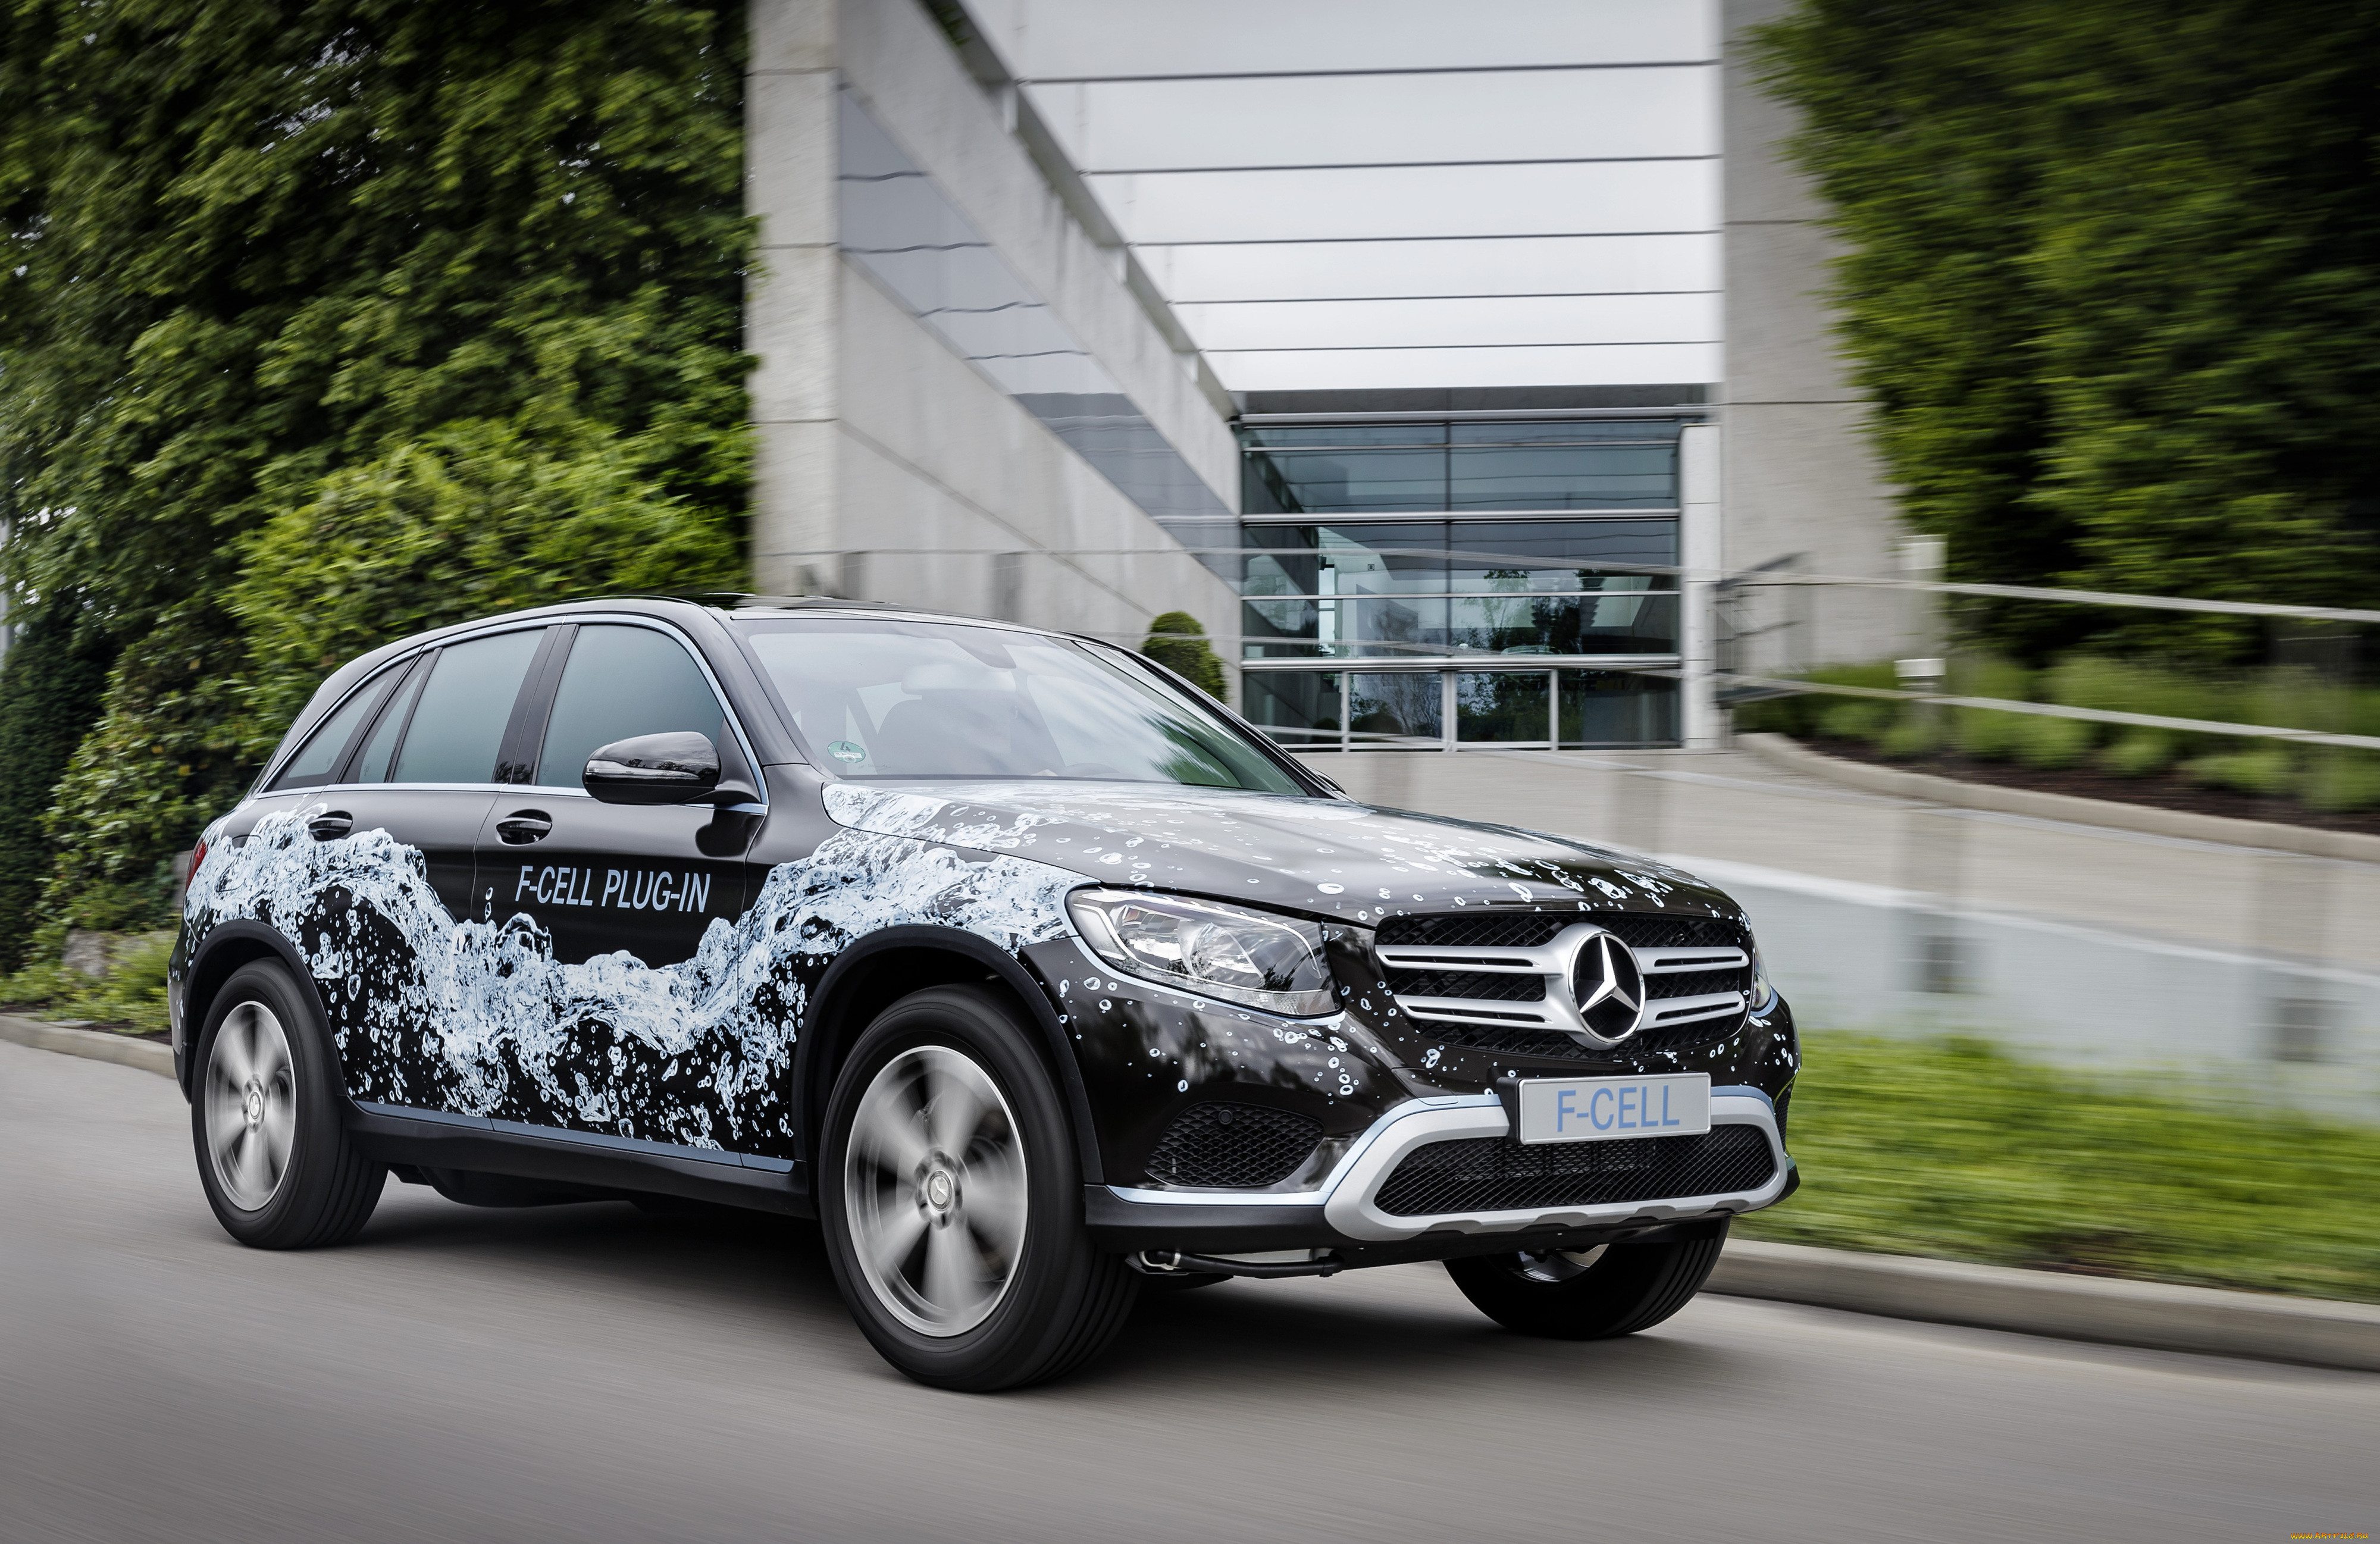 , mercedes-benz, prototype, f-cell, glc, plug-in